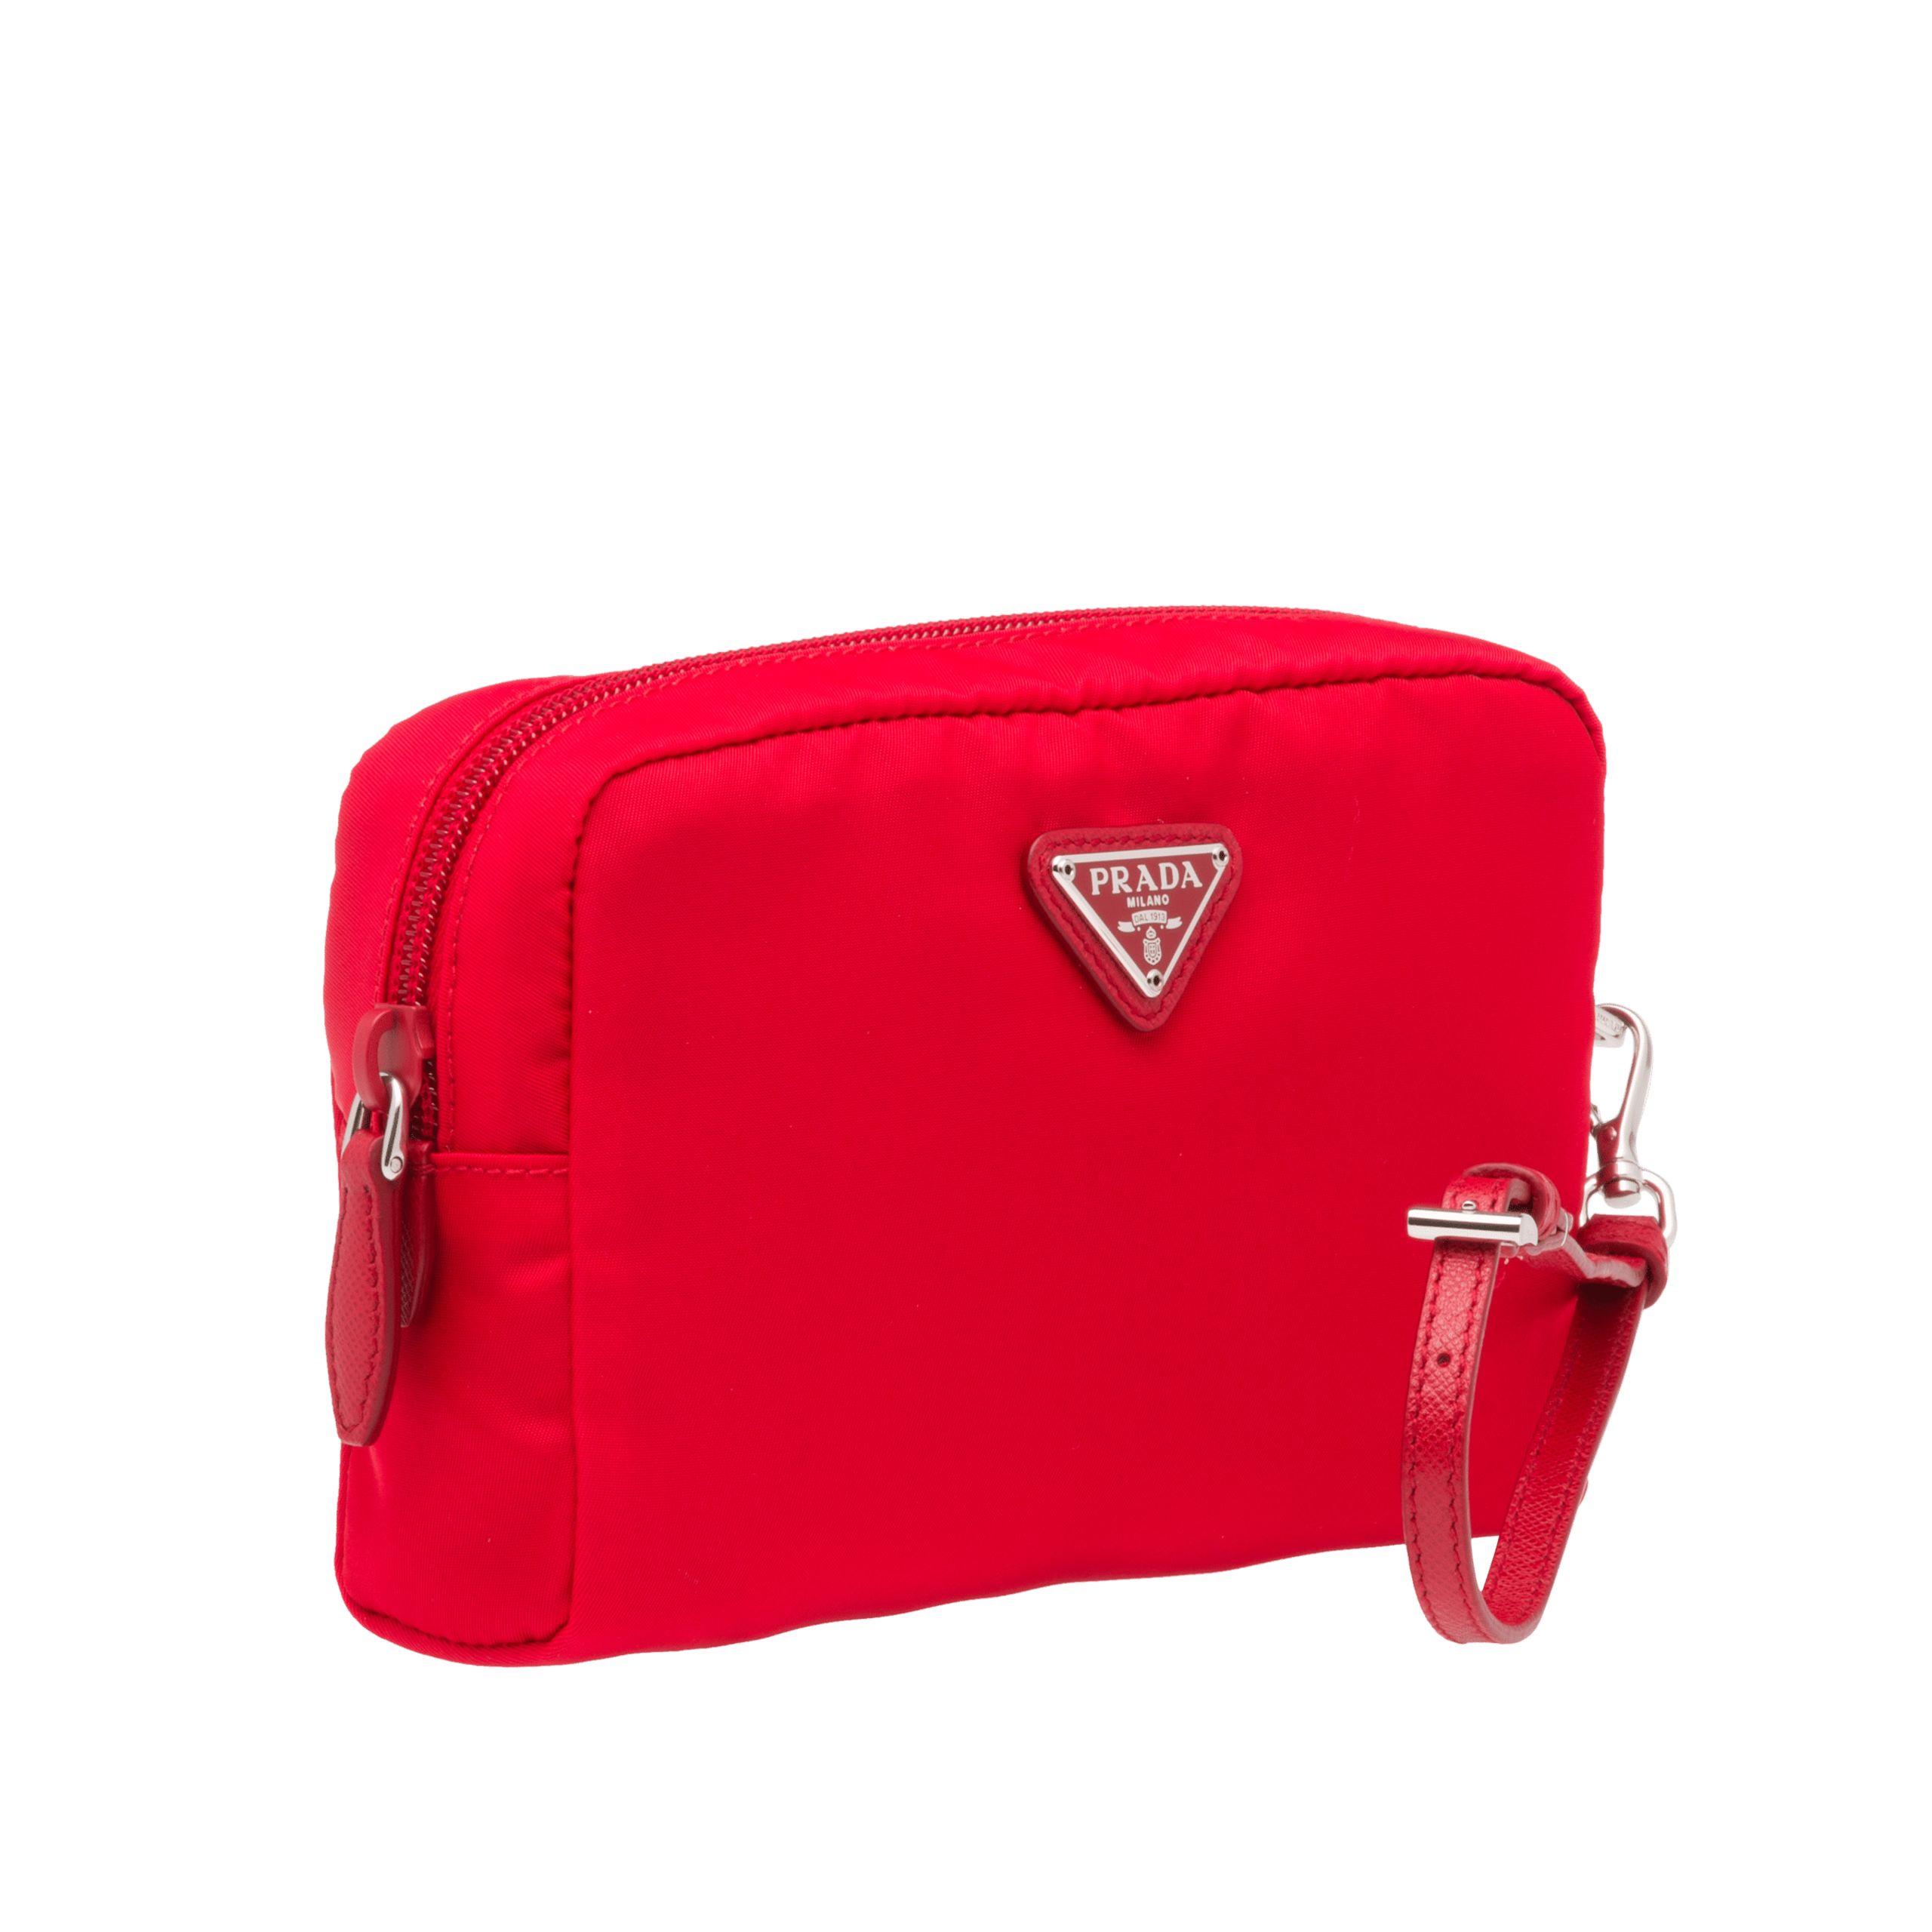 Prada Leather Fabric Cosmetic Pouch in Red - Lyst